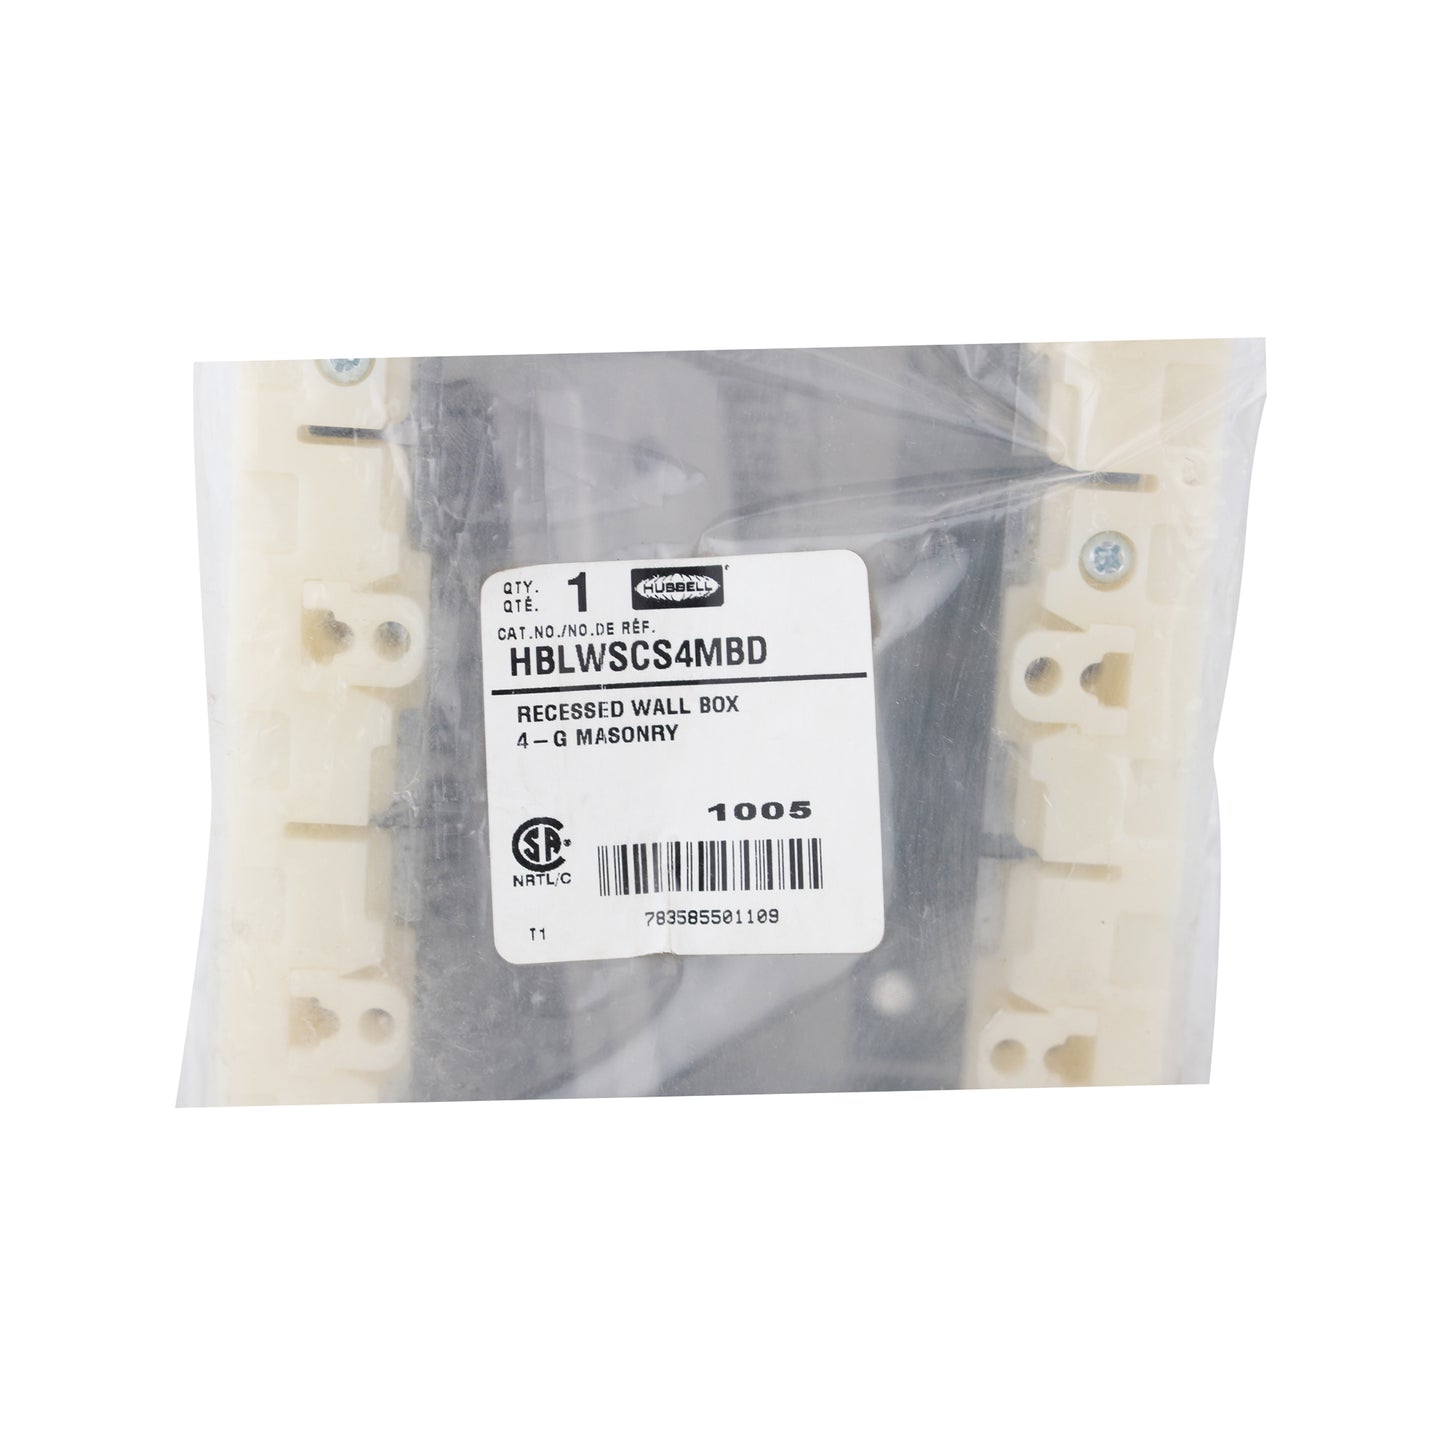 Hubbell, Inc. HBLWSCS4MBD